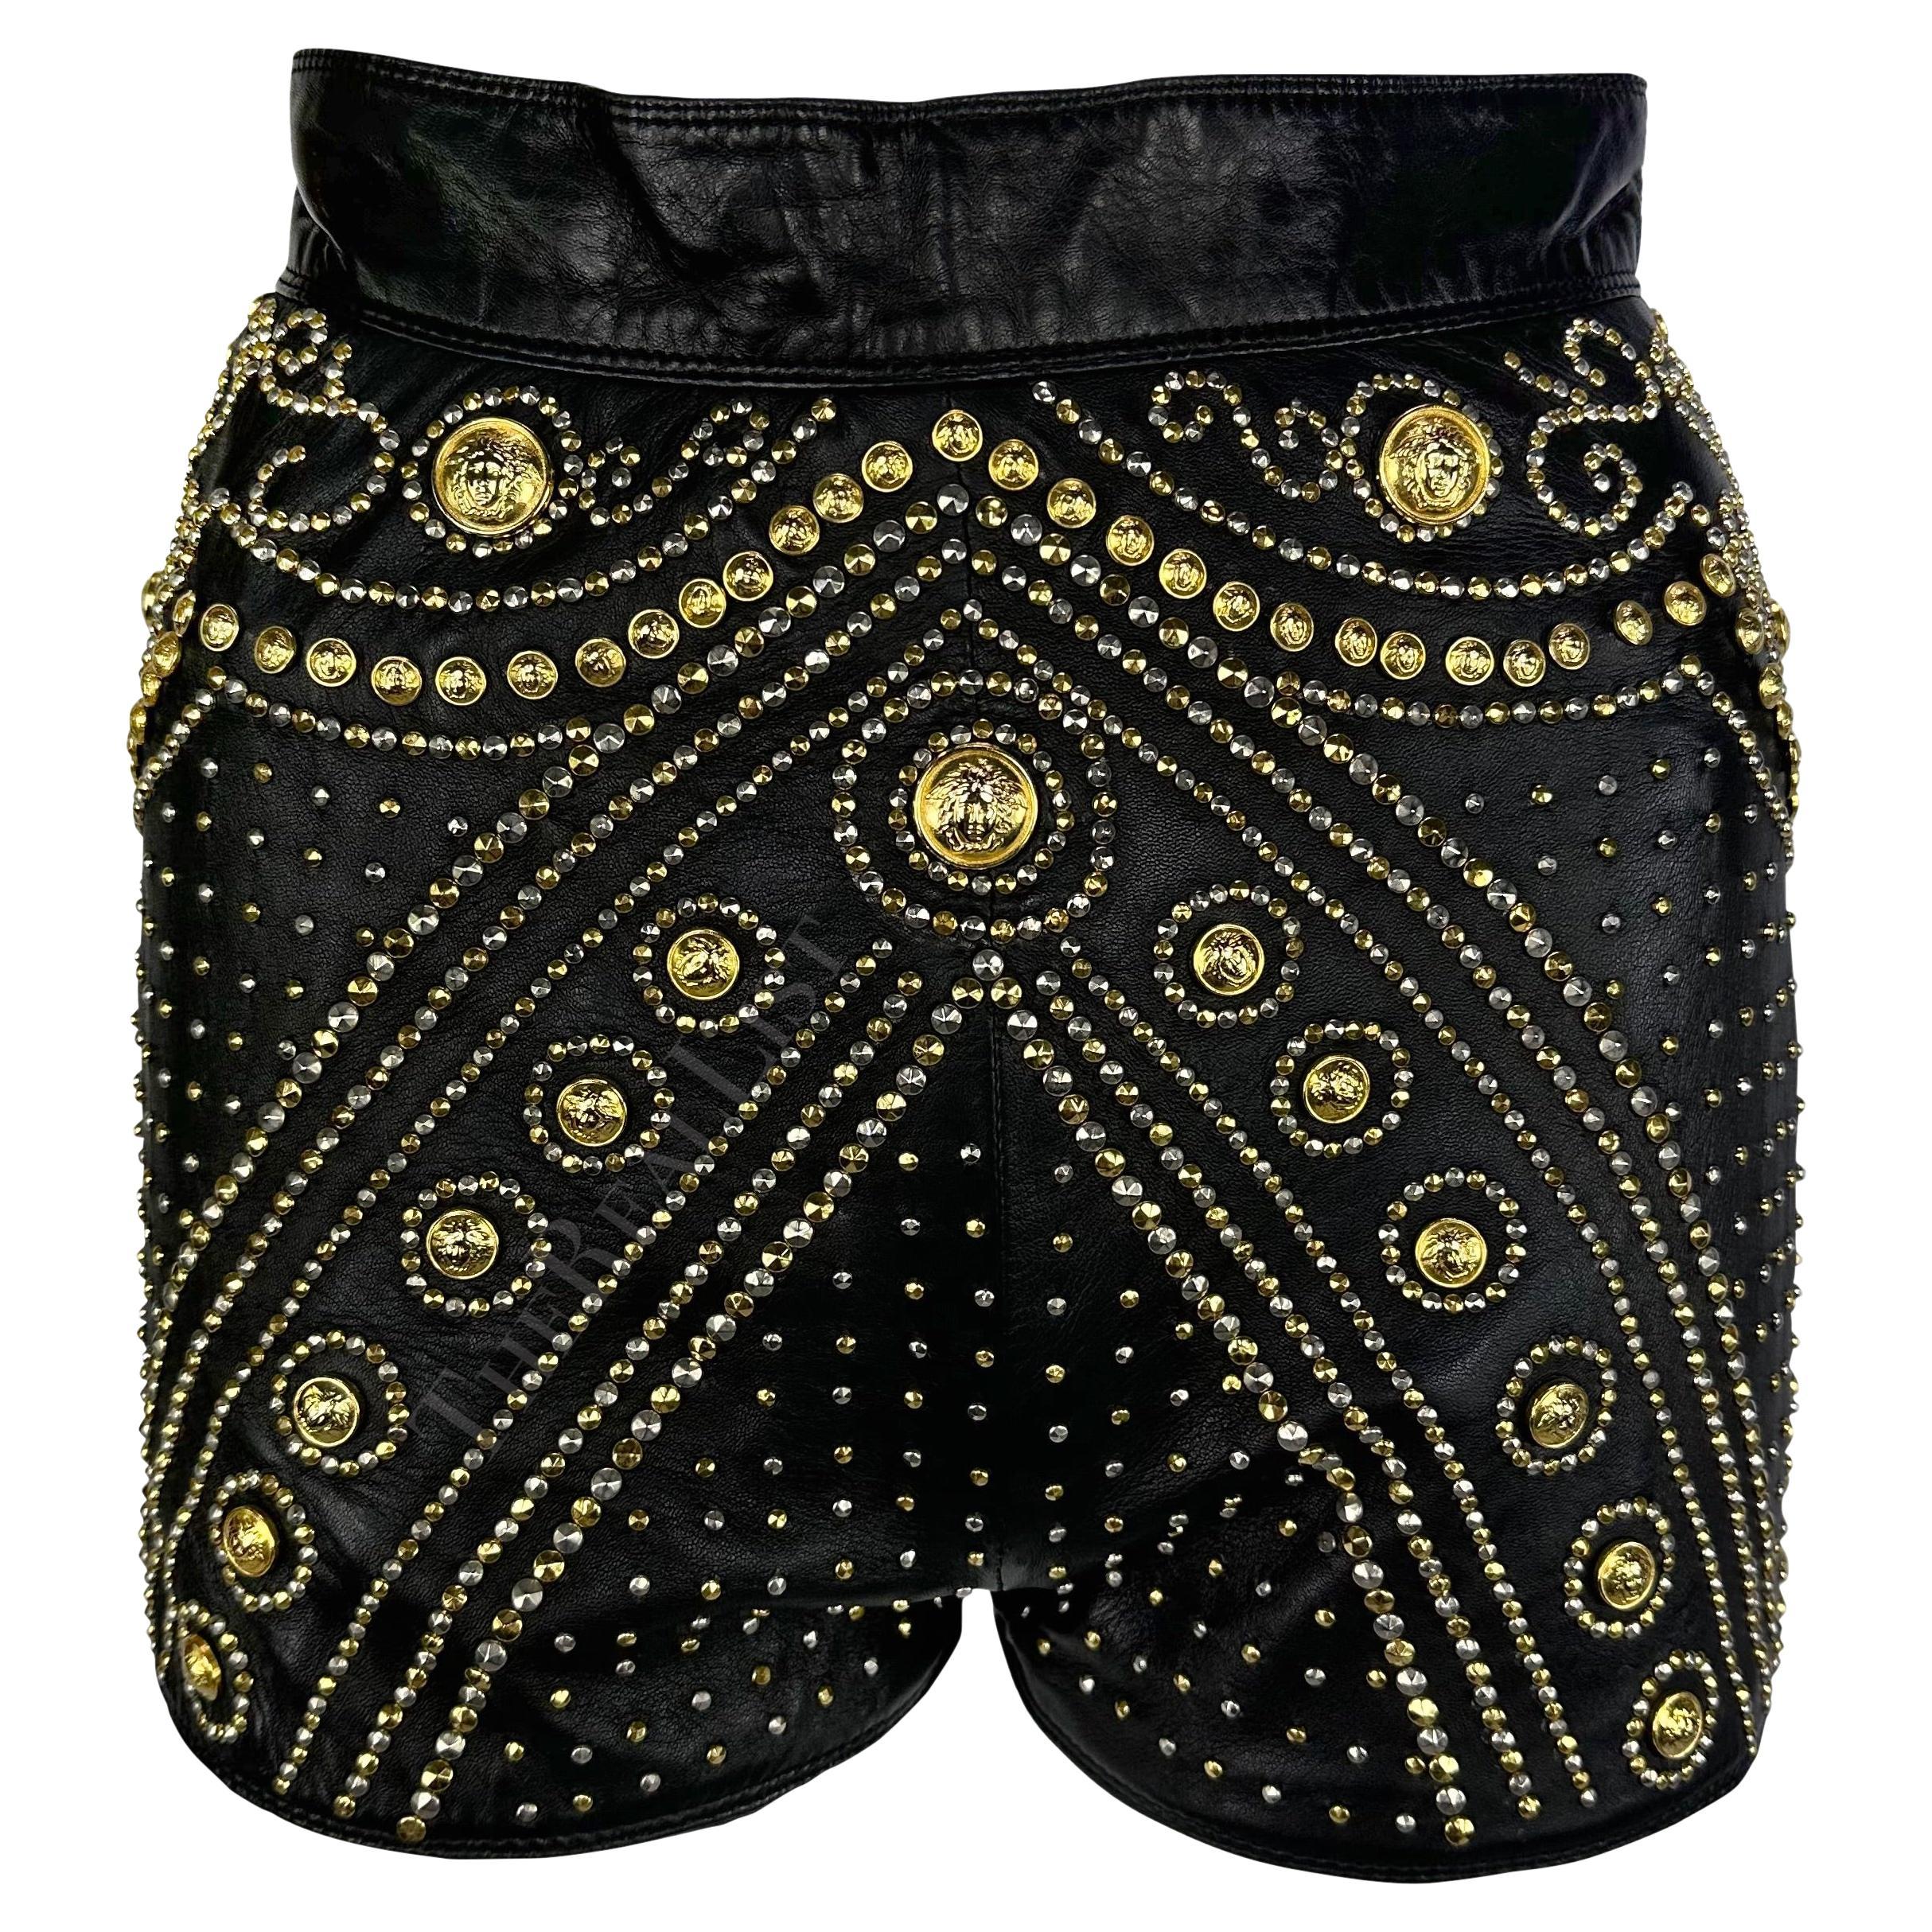 F/W 1992 Atelier Versace Haute Couture Runway Medusa Studded Leather Shorts